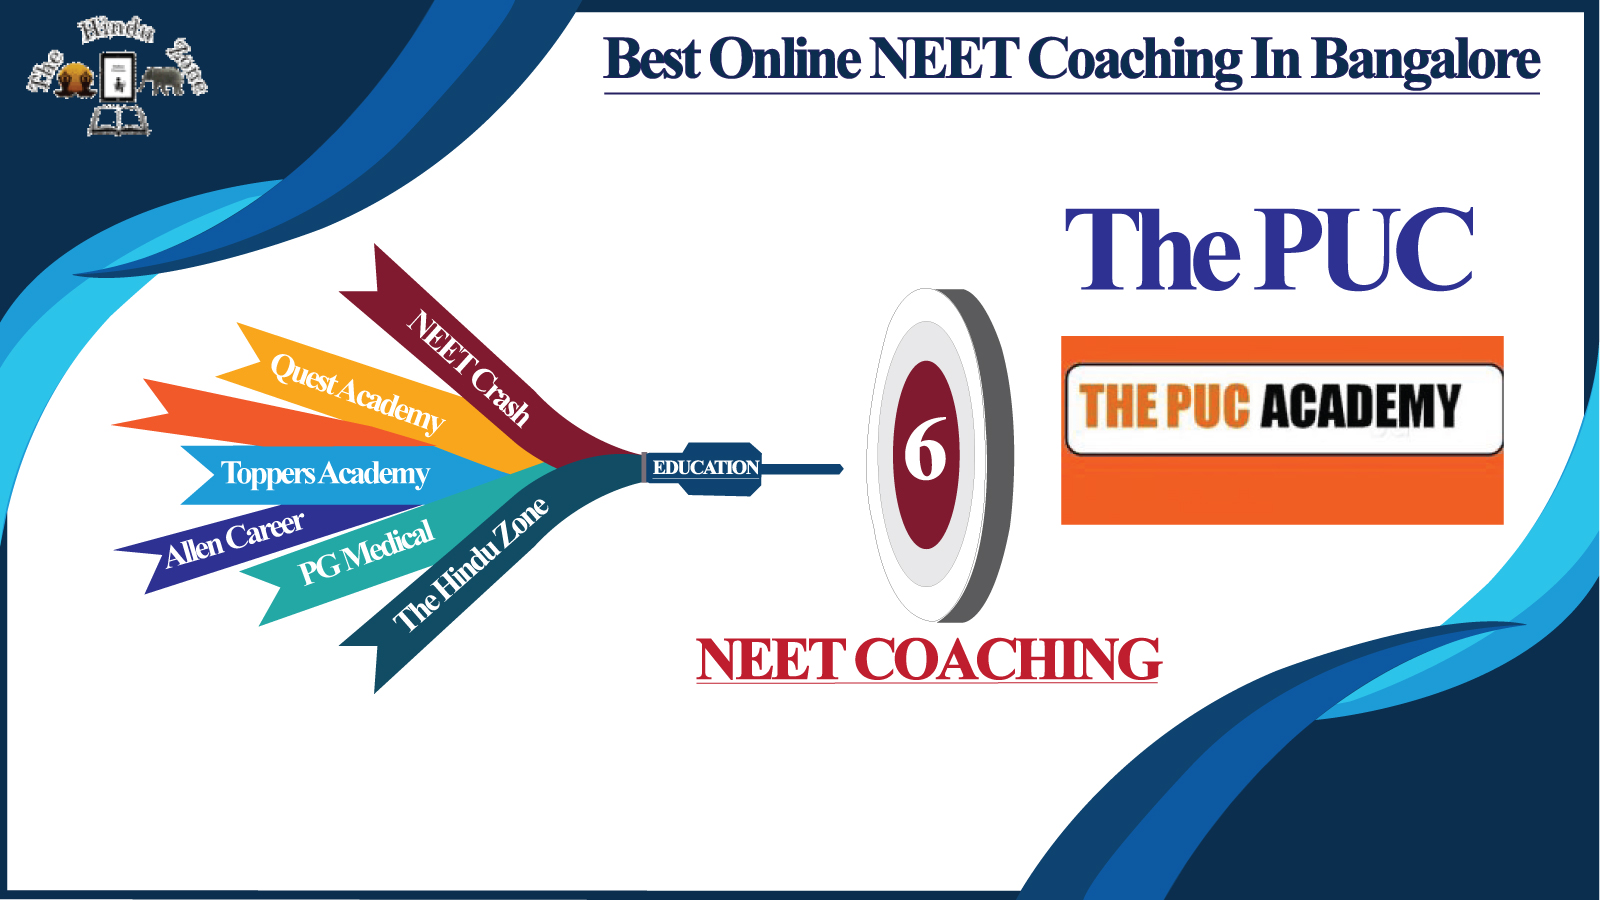 The PUC Academy For NEET Coaching In Bangalore